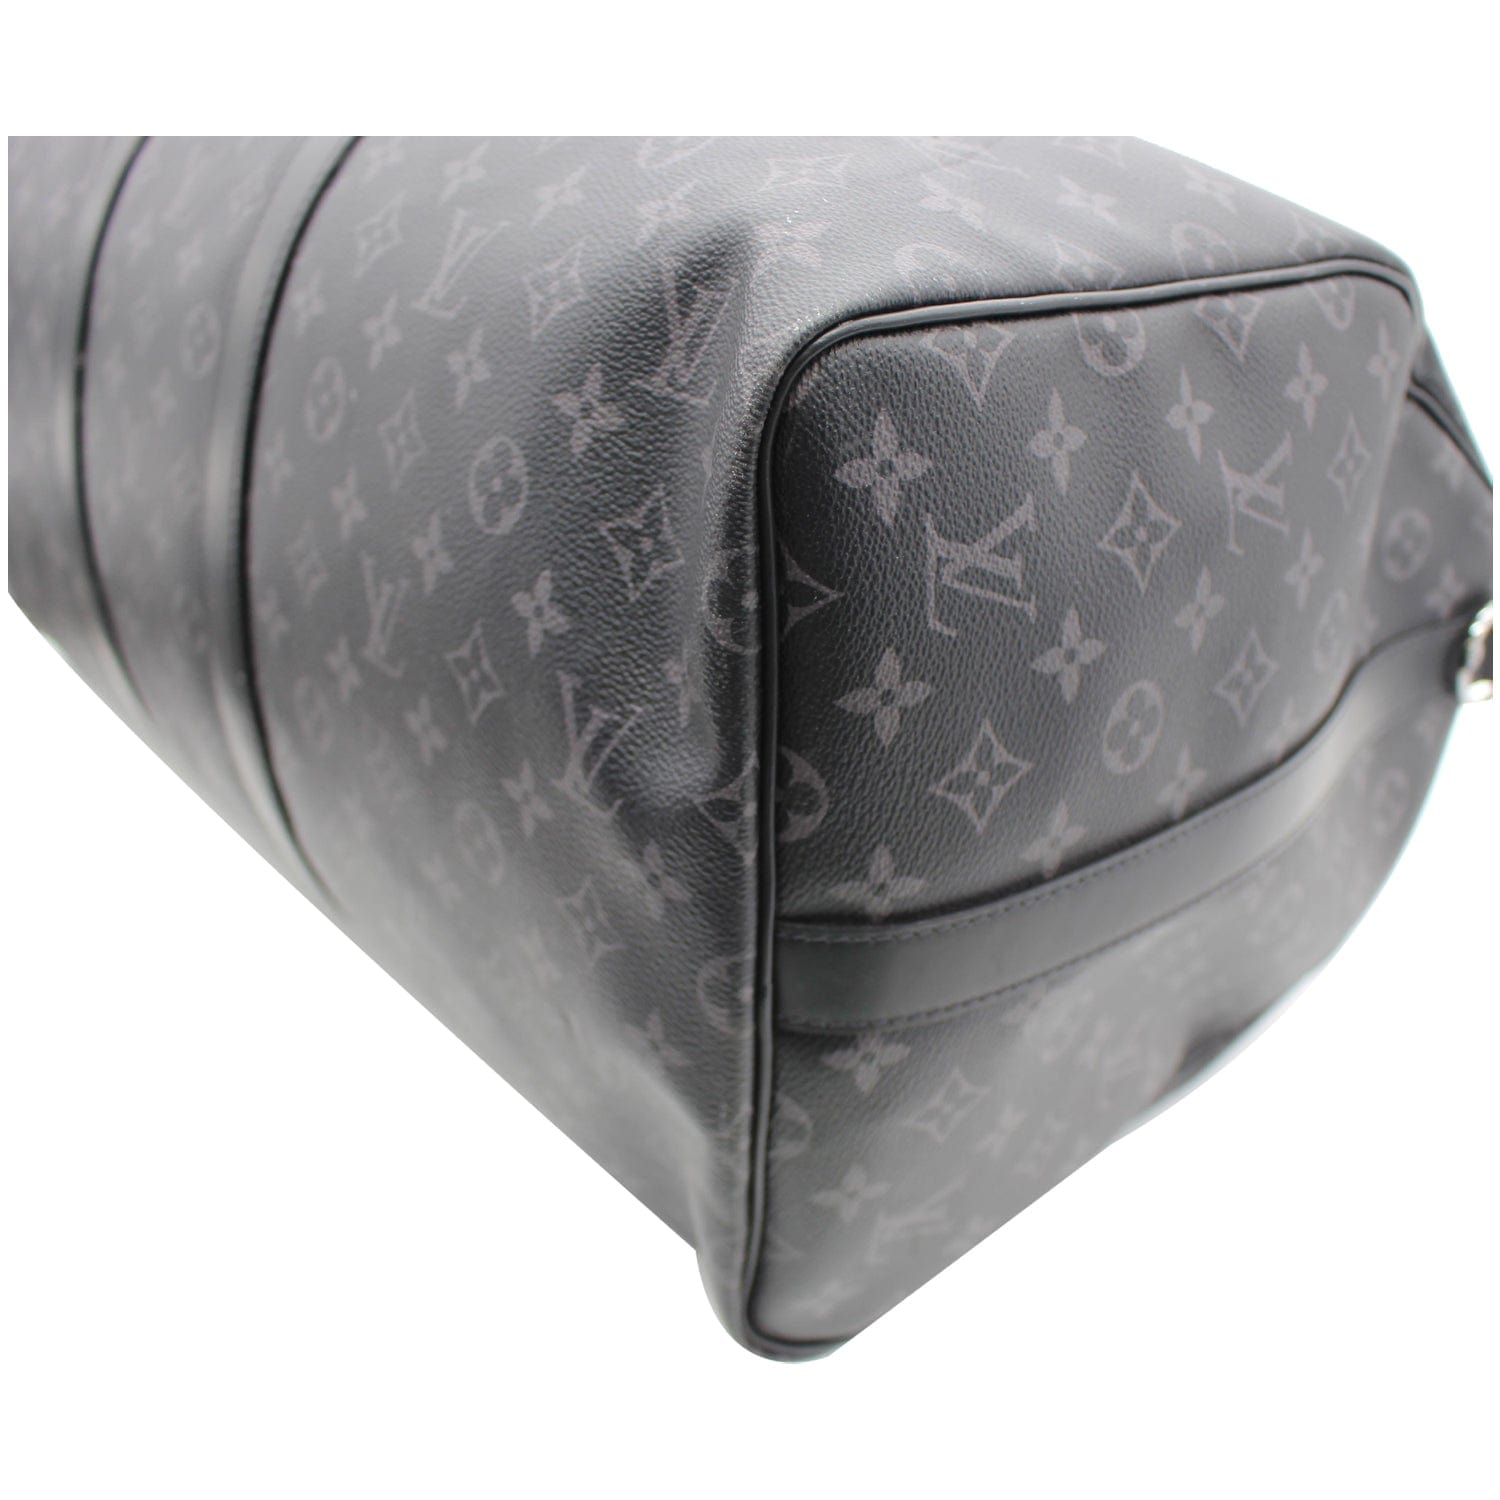 Buy Louis Vuitton Monogram Eclipse Keepall Bandouliere Travel Bag (Keepall  55) at